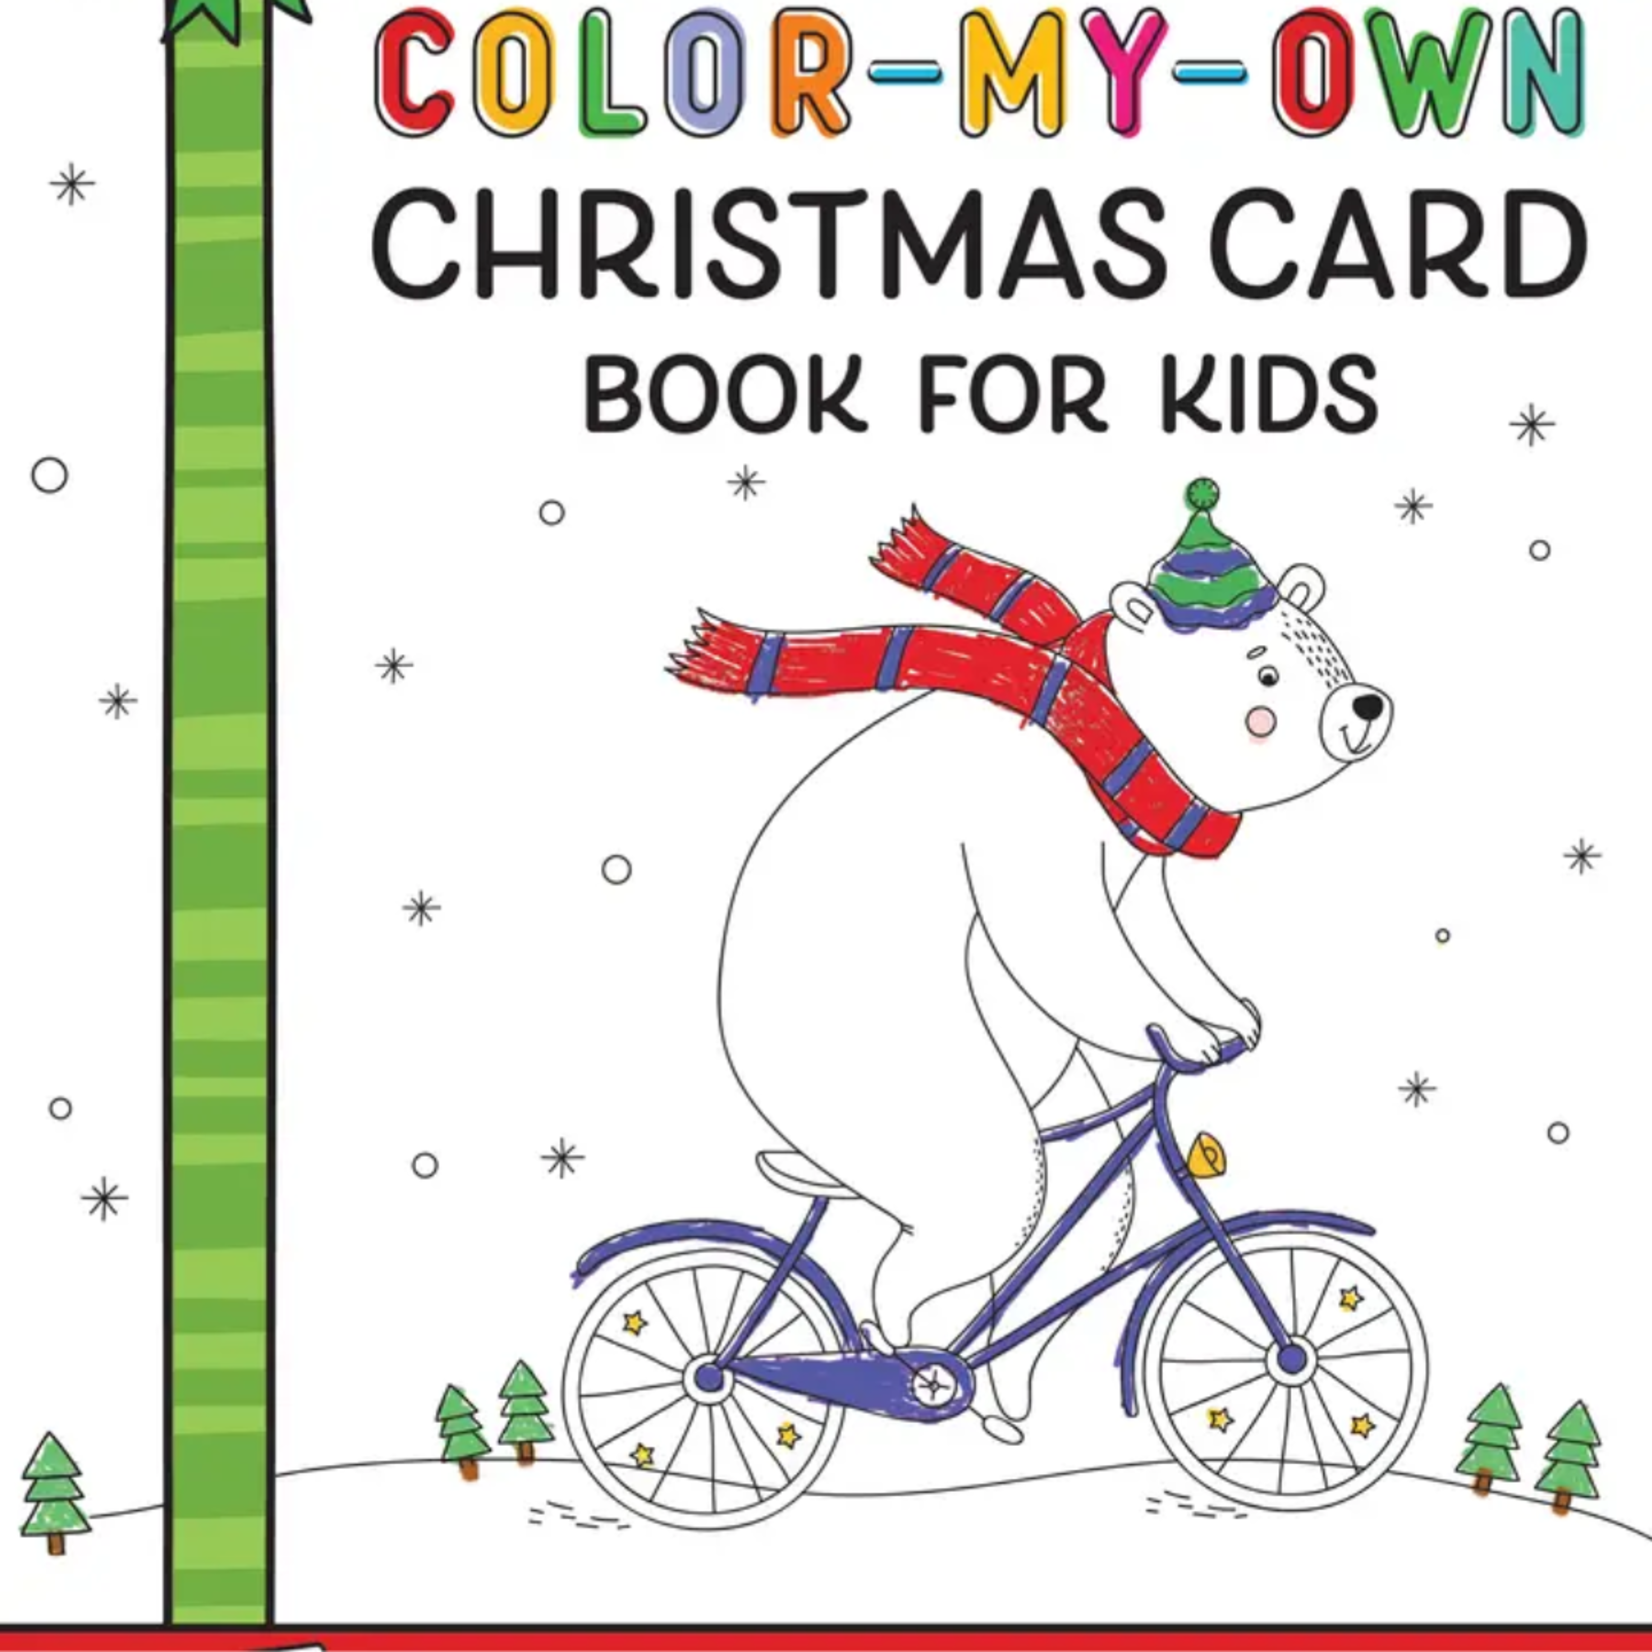 Color-My-Own Christmas Card Book